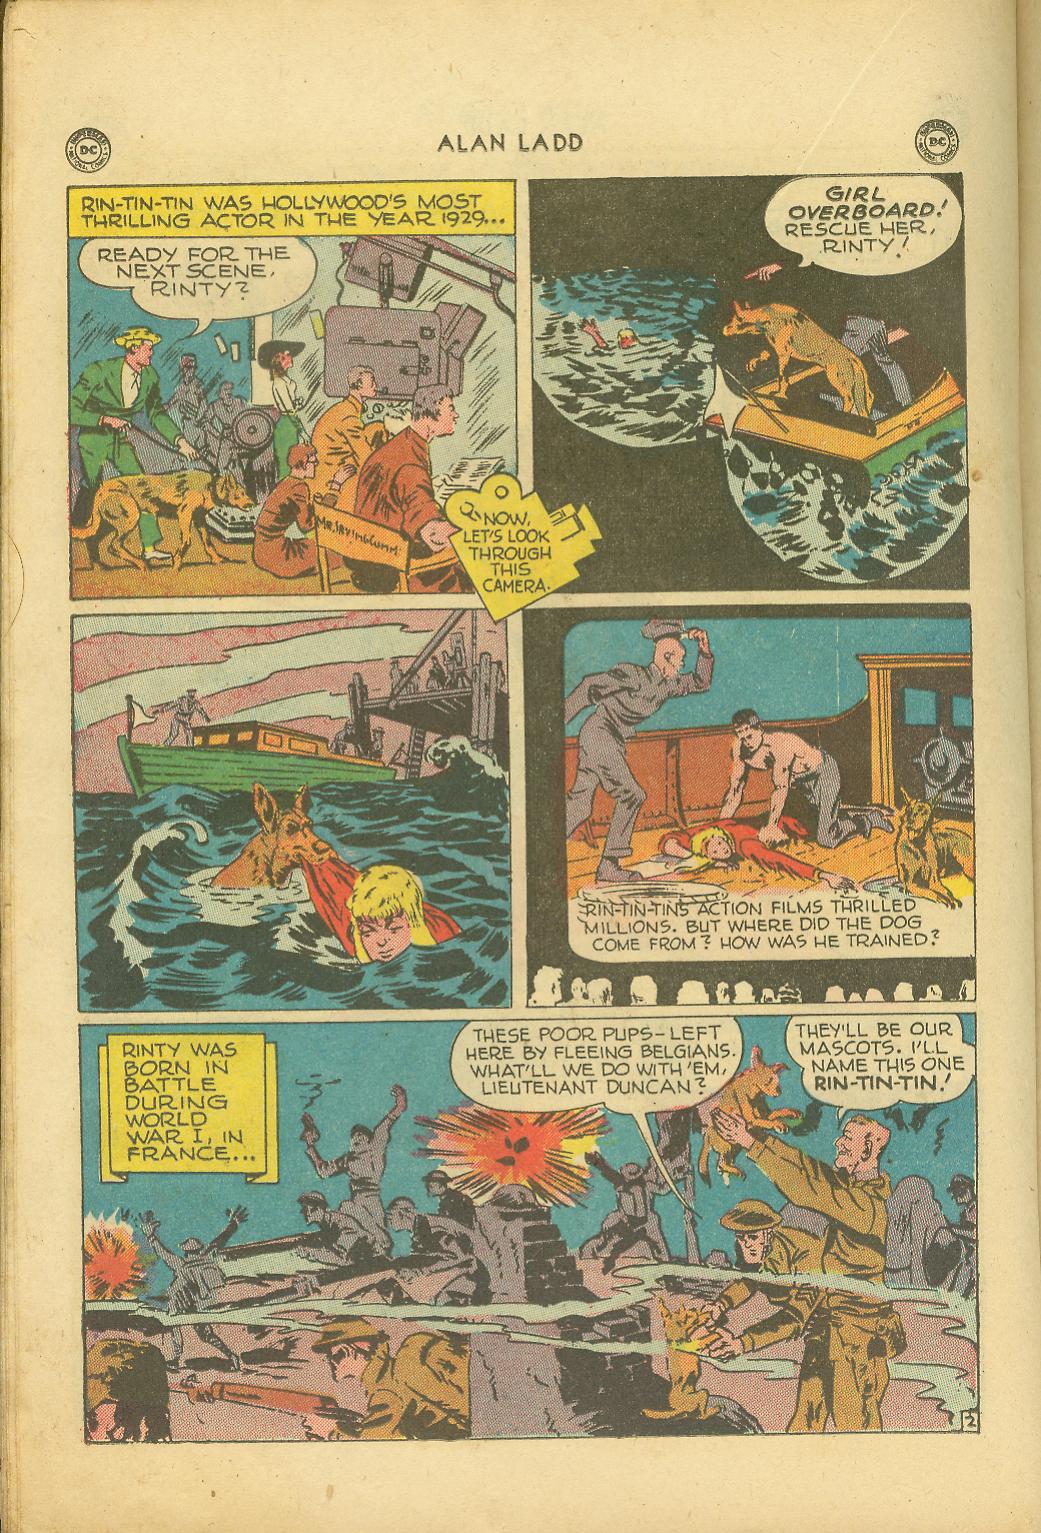 Read online Adventures of Alan Ladd comic -  Issue #7 - 32